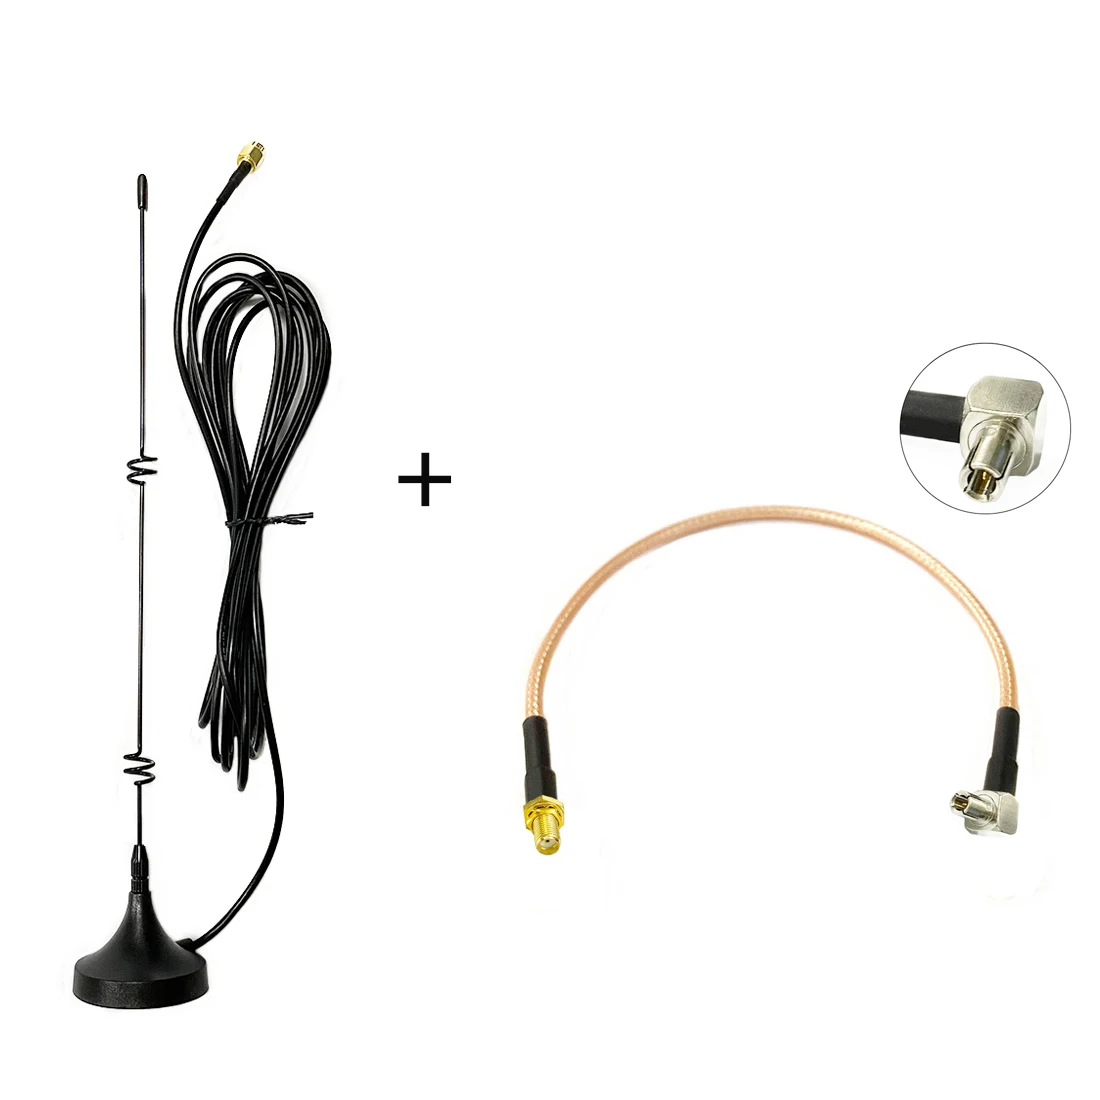 4G 3G GSM Antenna 6dbi High Gain Magnetic Base with 3meters Cable SMA Male +SMA Female Connector  to TS9 Male RG316 Cable 15cm 1pc 2 4ghz 6dbi wifi antenna magnetic bse with 1 2 meters extension cable sma male plug connector